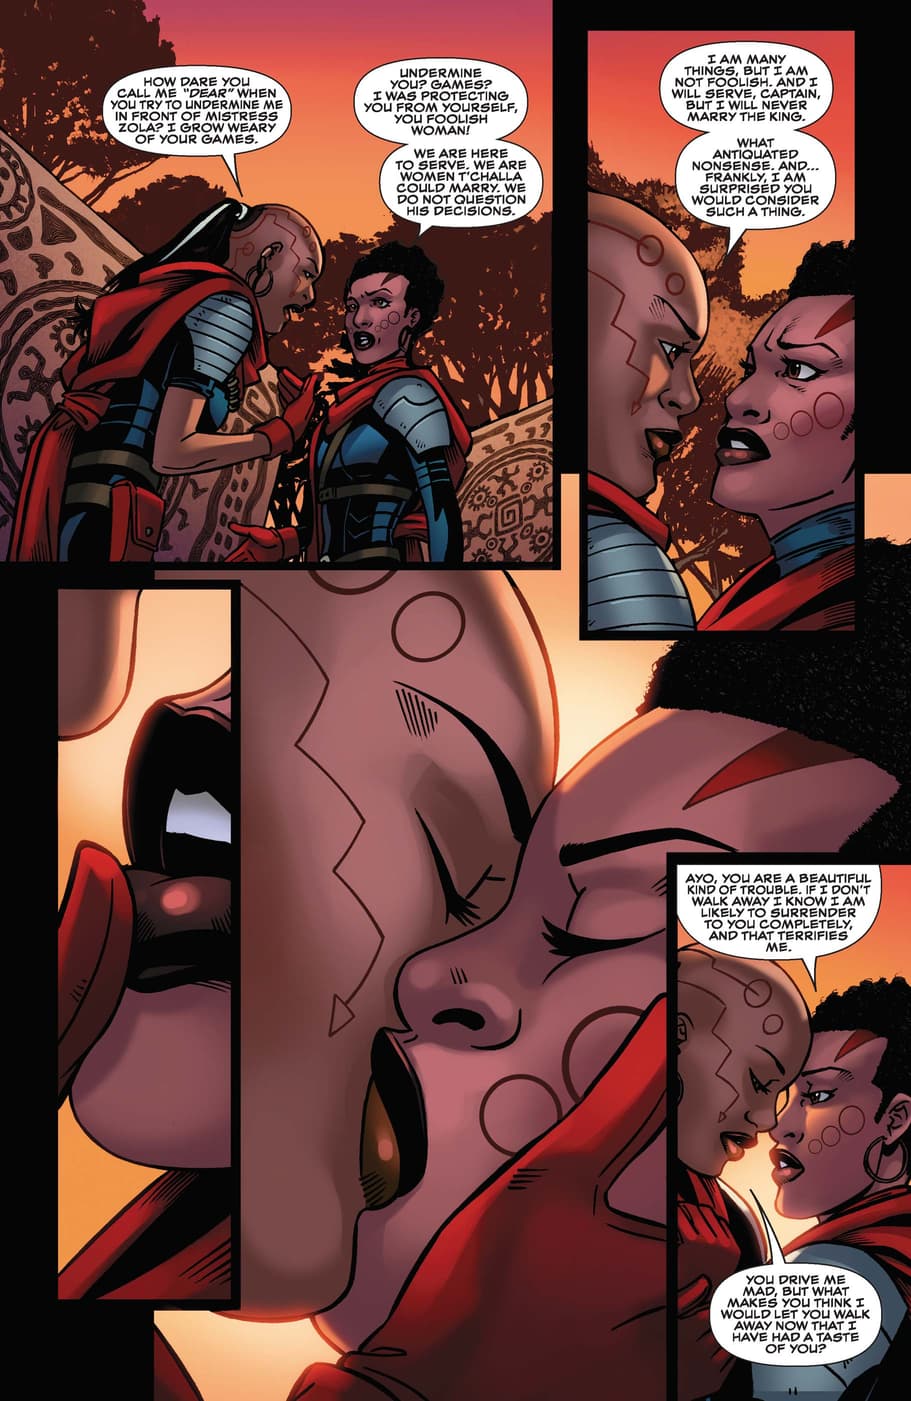 A first kiss in BLACK PANTHER: WORLD OF WAKANDA (2016) #2.